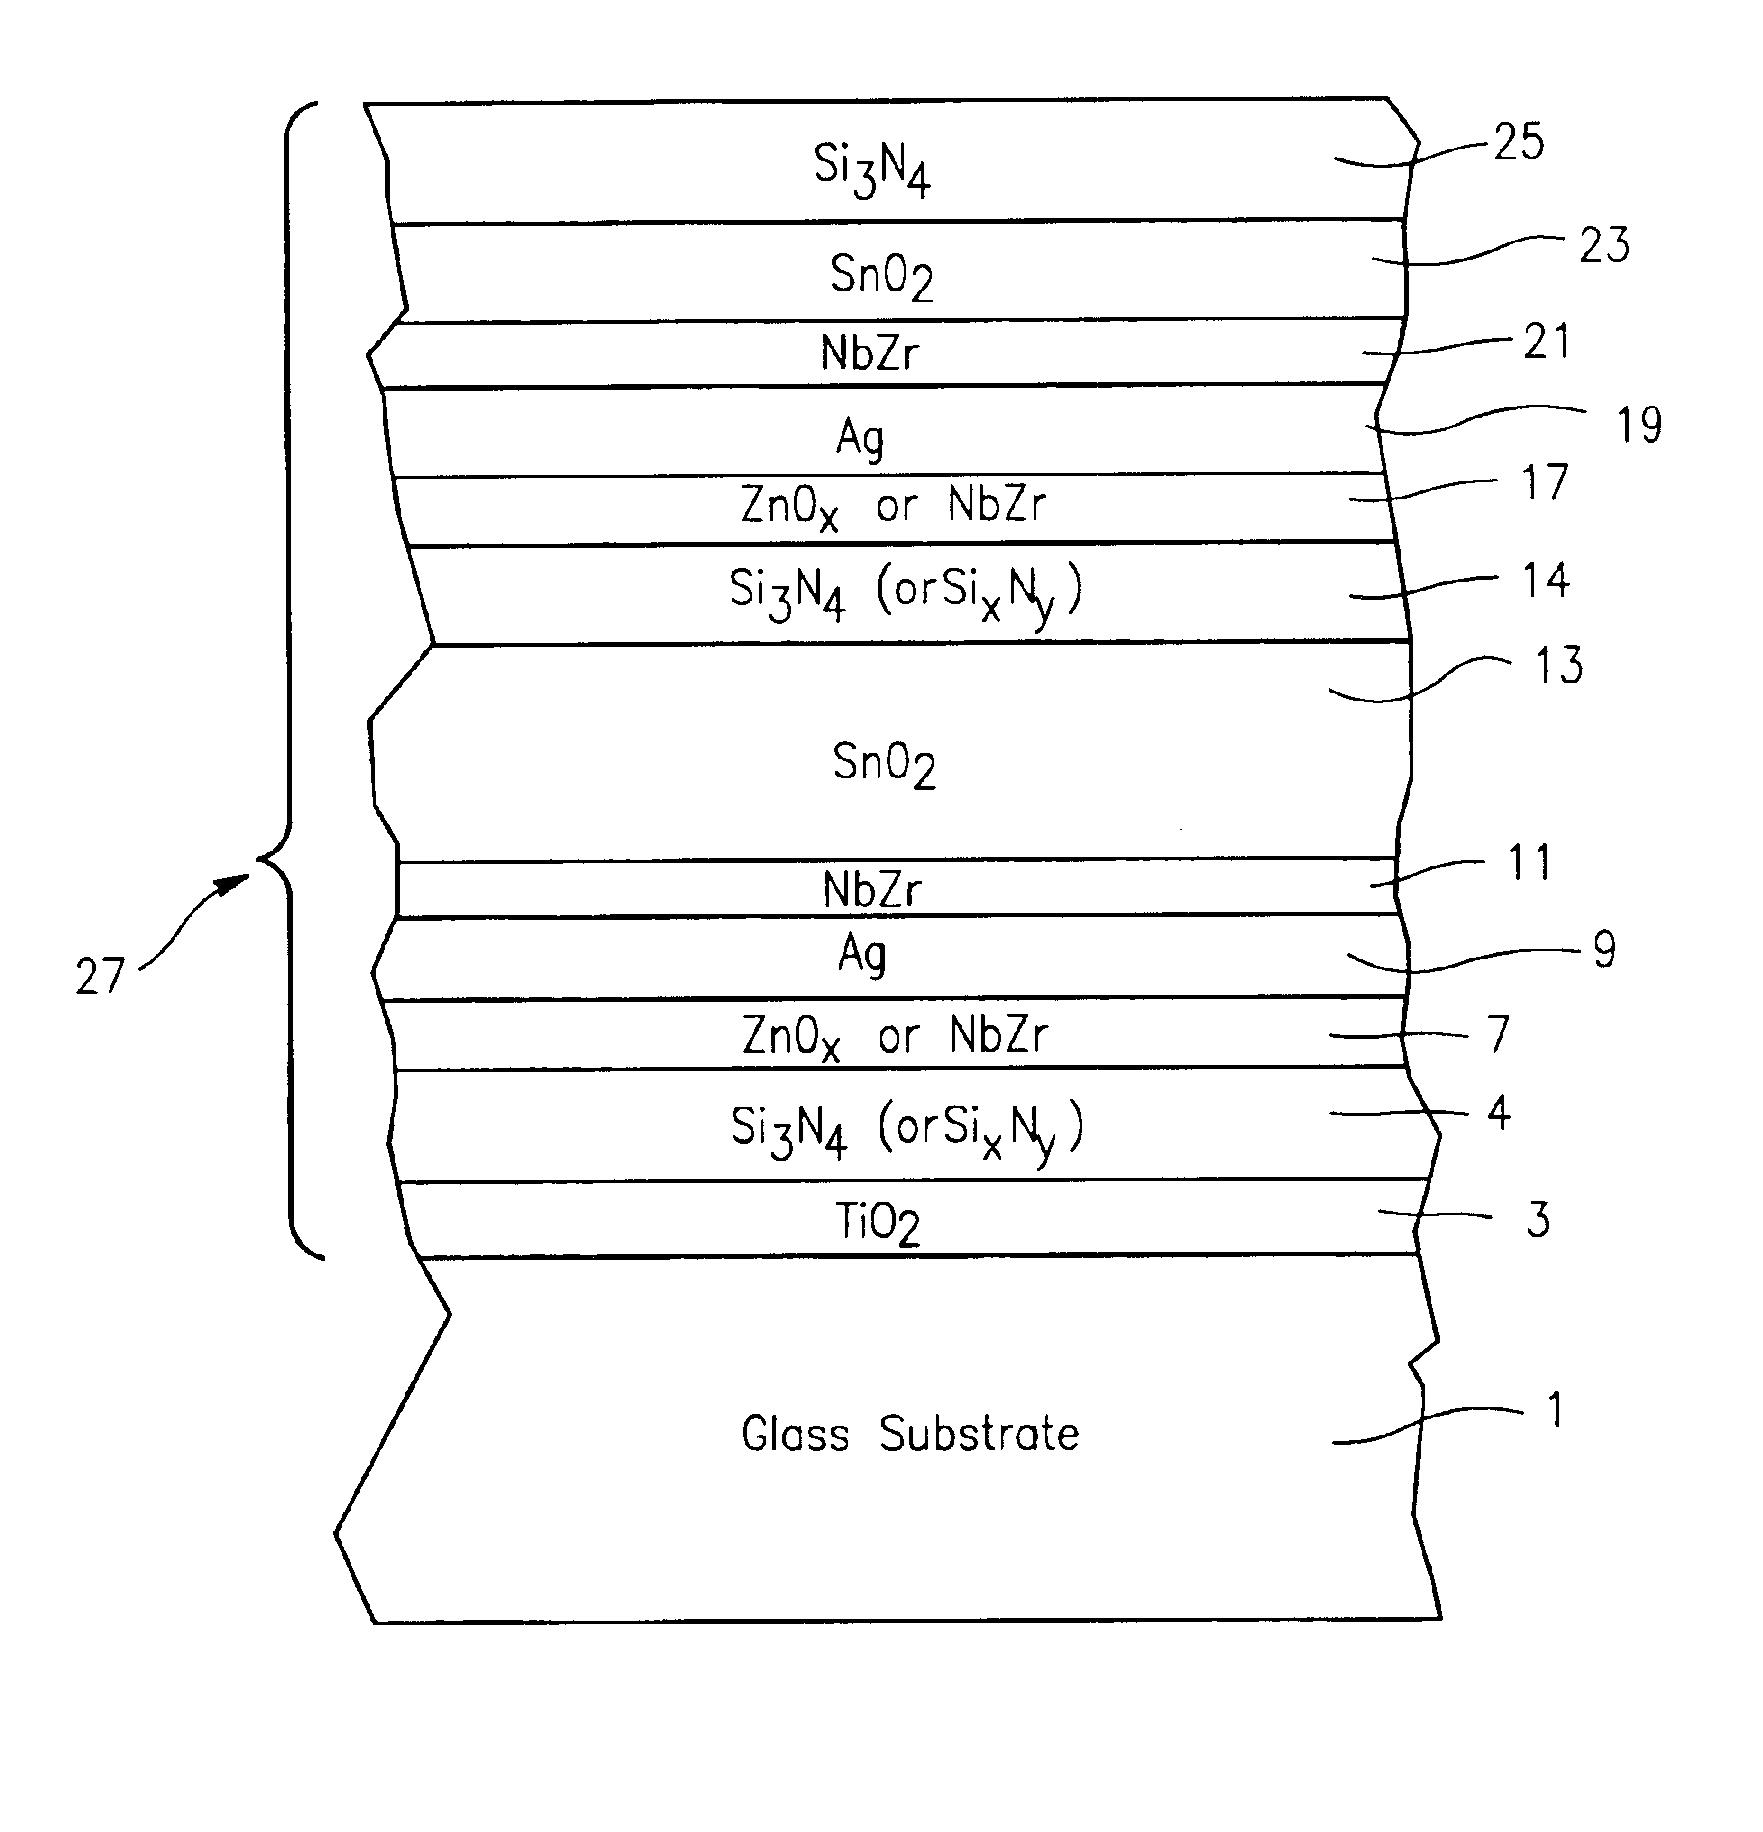 Coated article with niobium zirconium inclusive layer(s) and method of making same